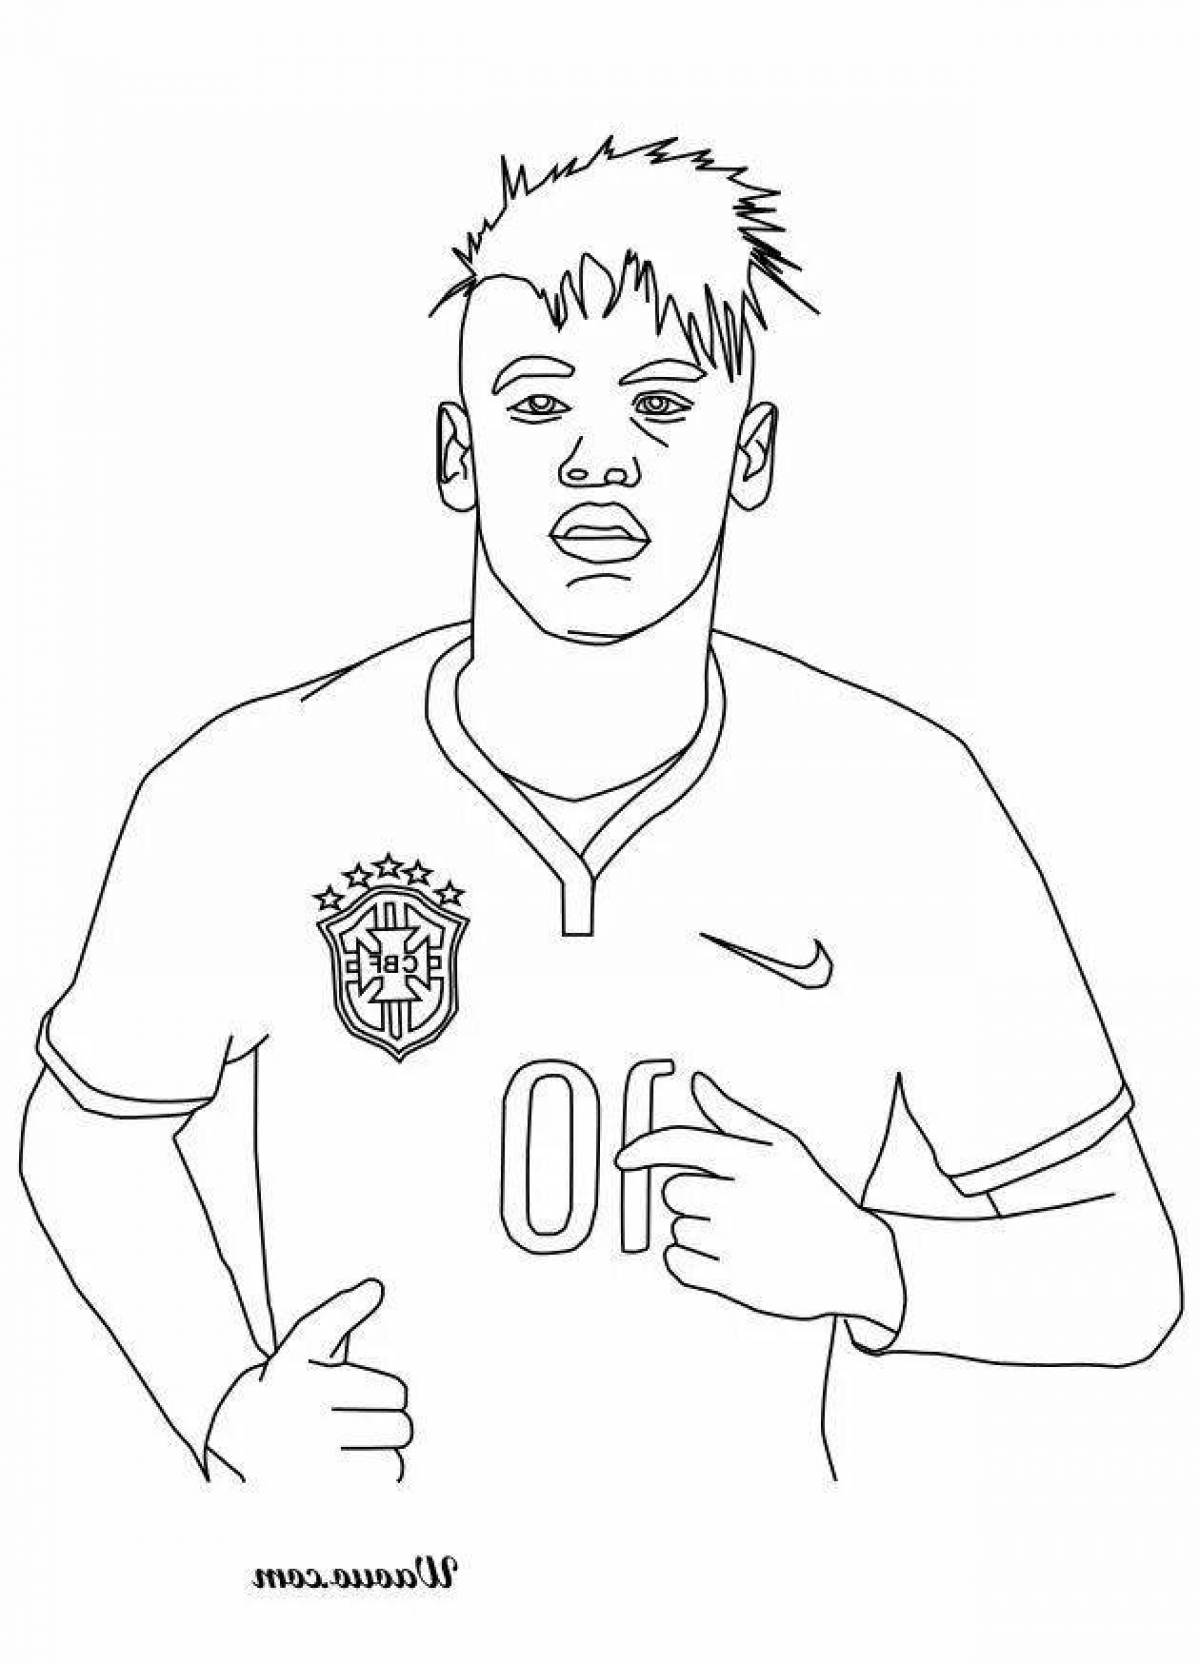 Neymar football player coloring page